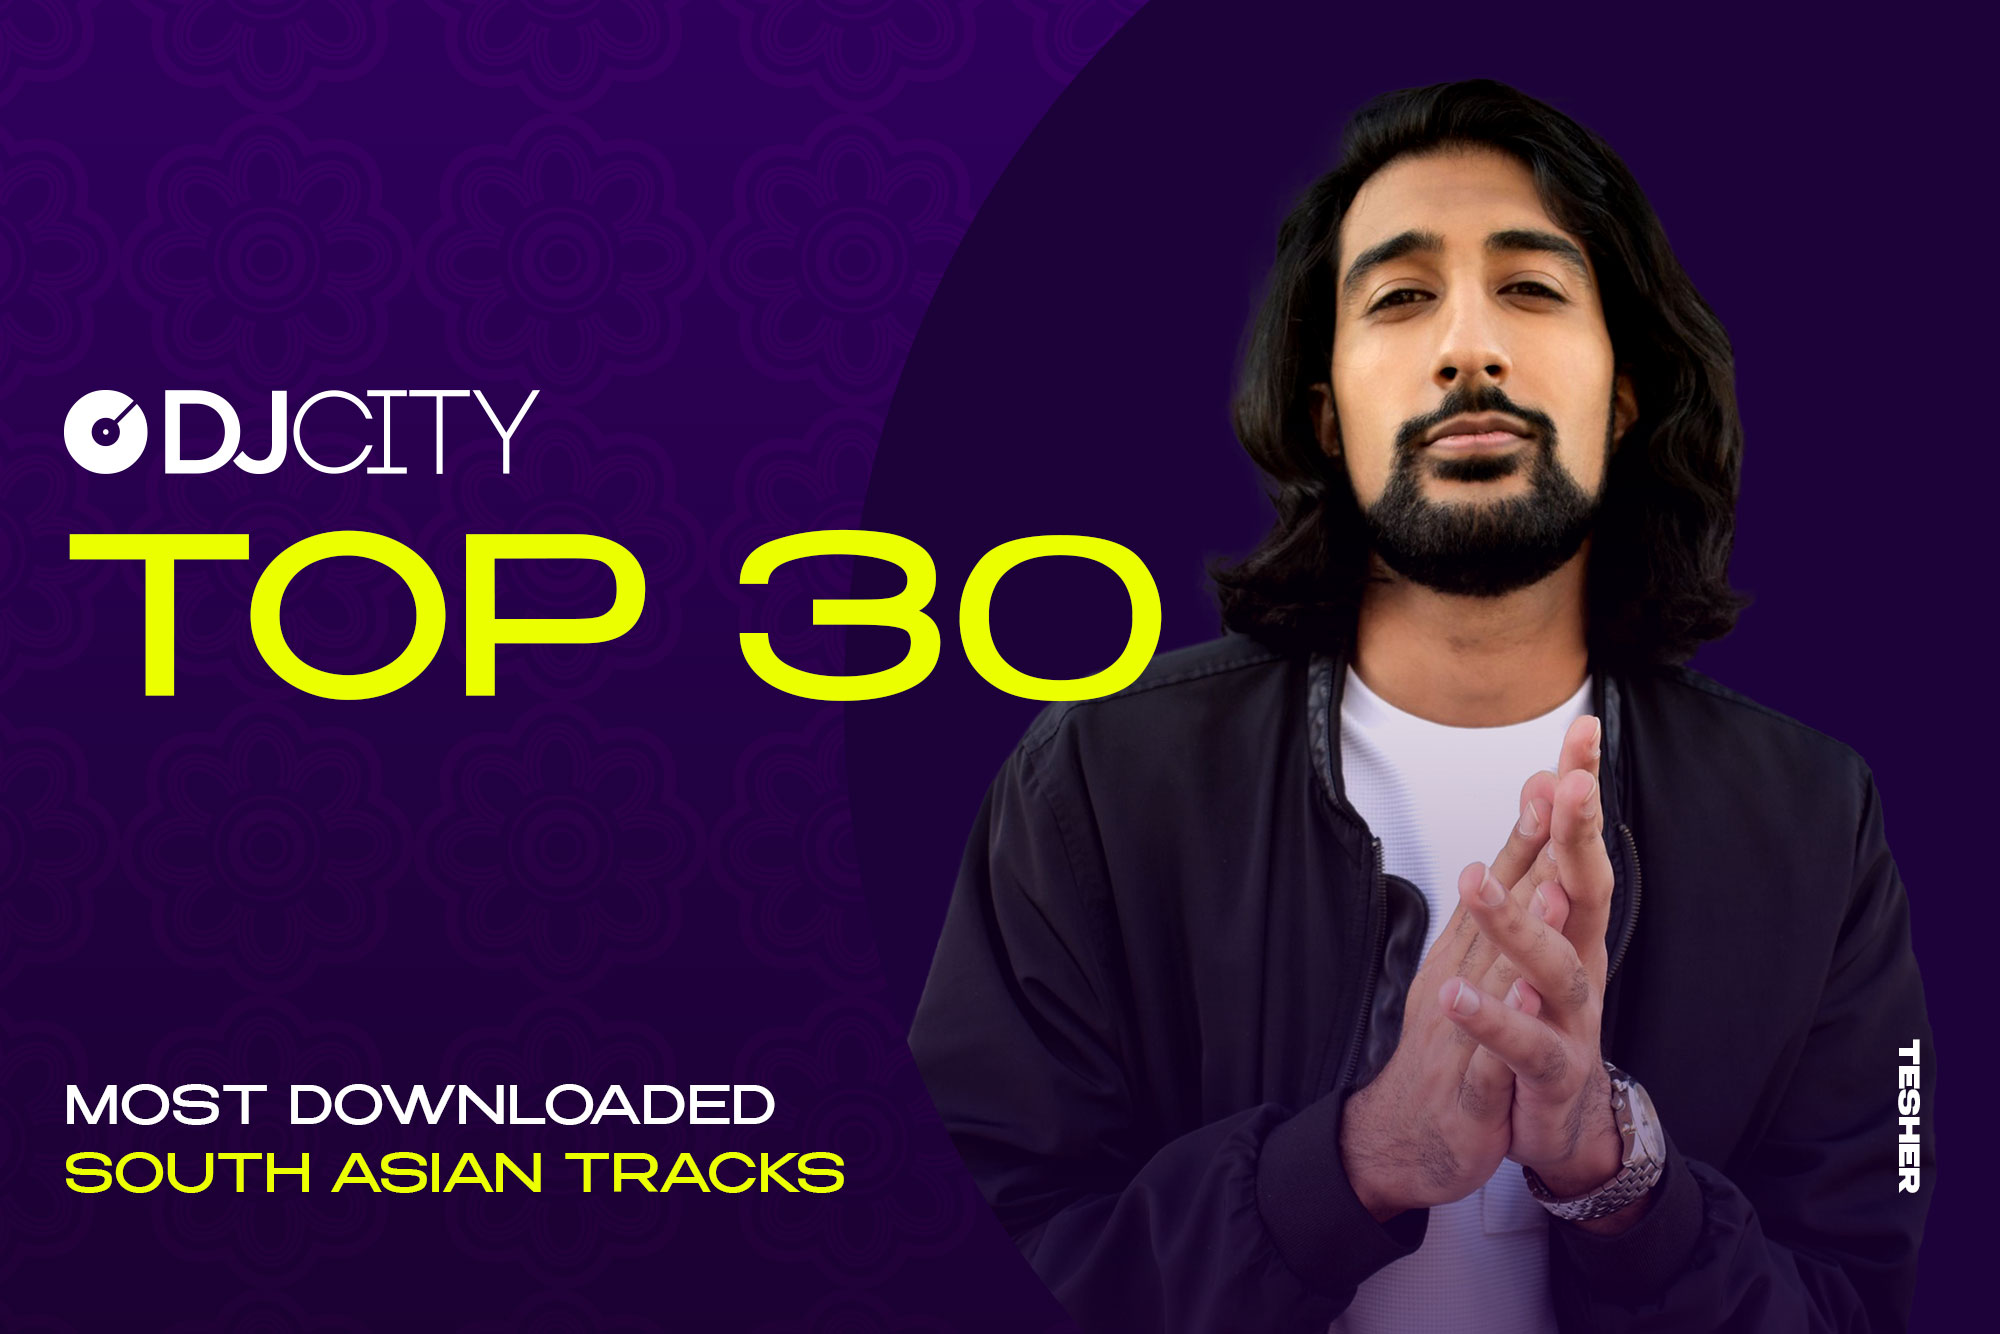 DJcity's 30 Most Downloaded South Asian Tracks